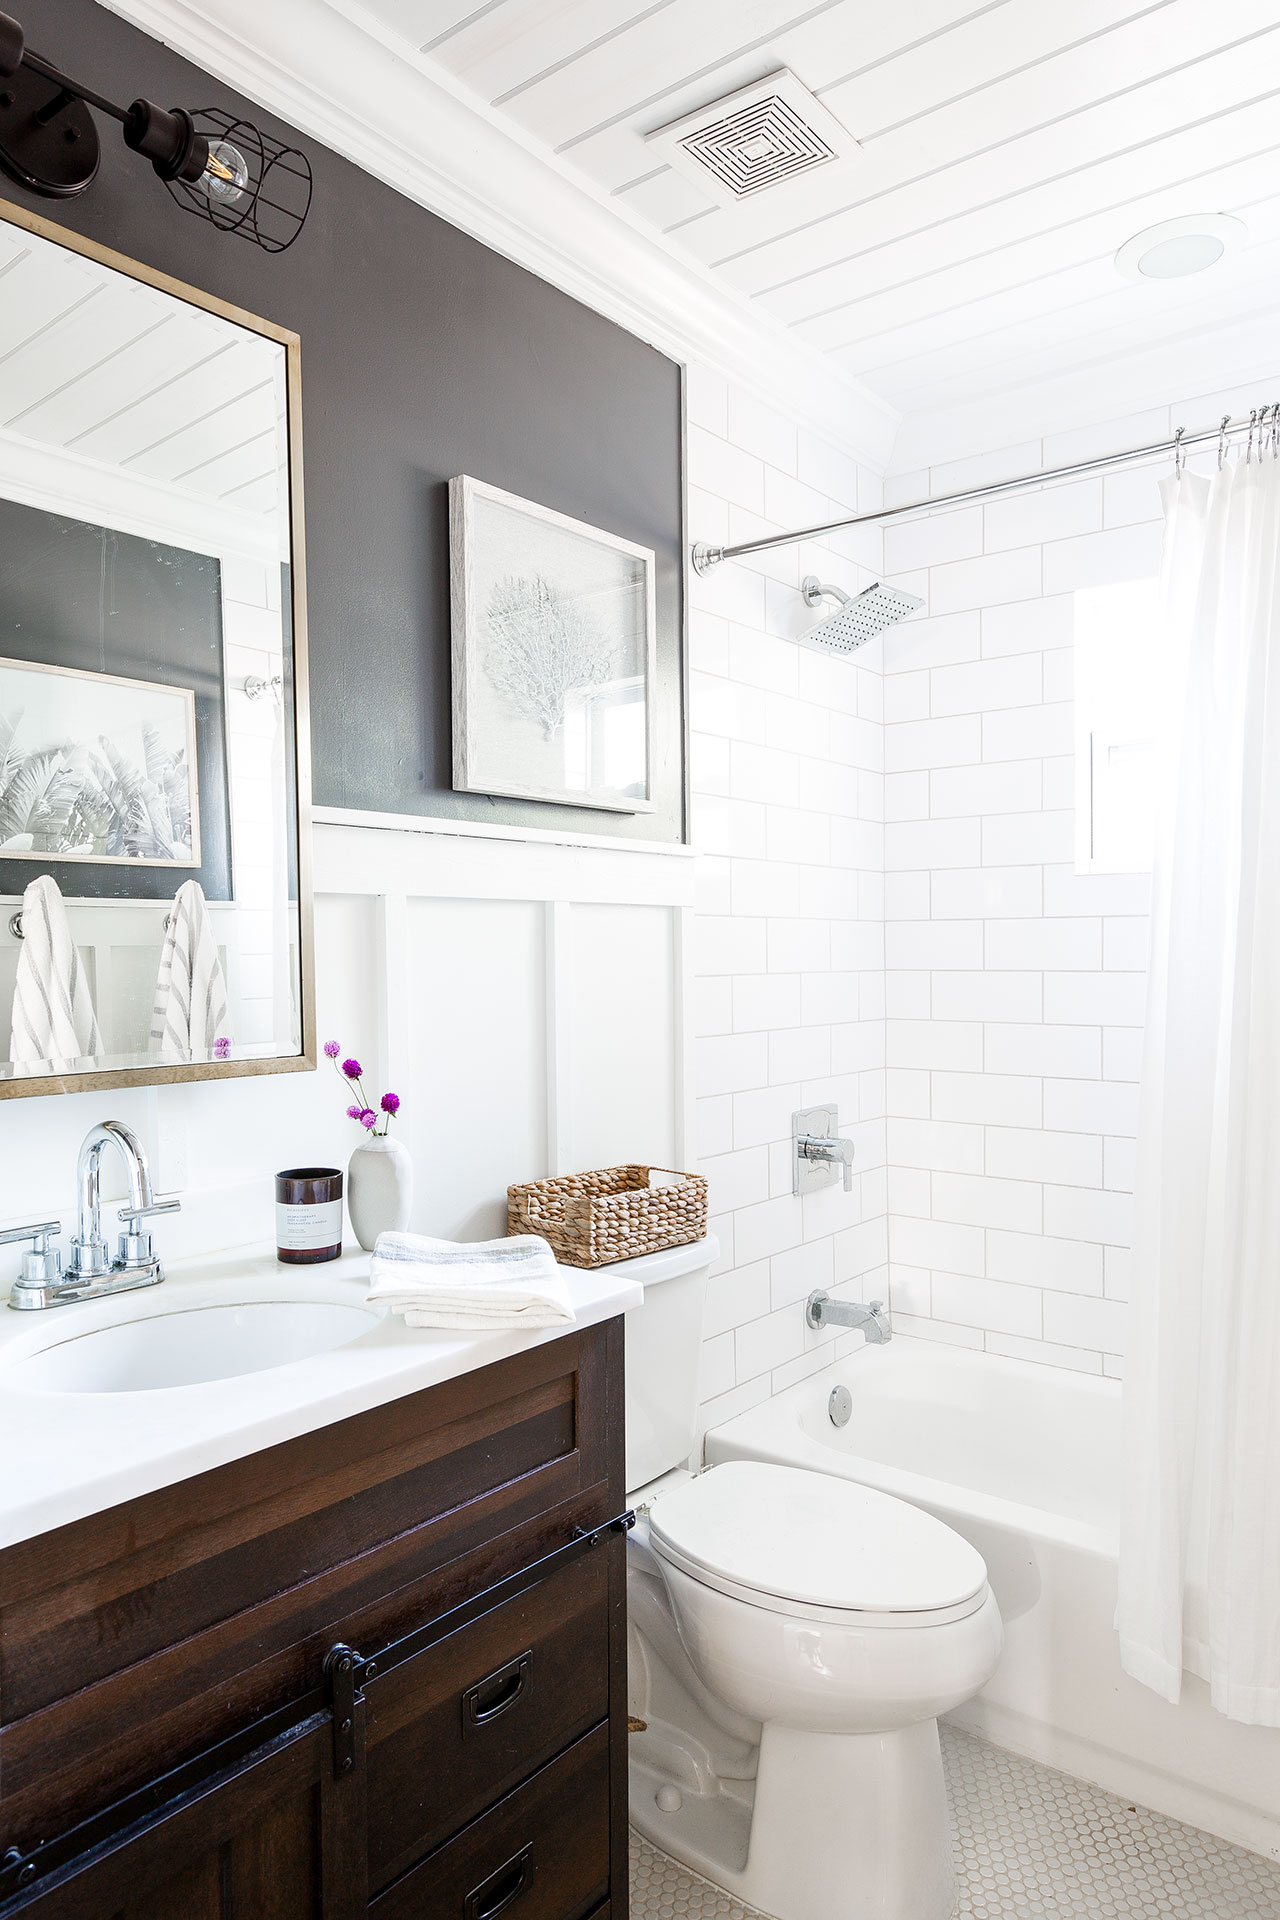 Beautiful interior design of the guest bathroom with a great amount of natural light, gorgeous white subway tiles, and complemented with a darker brown vanity.